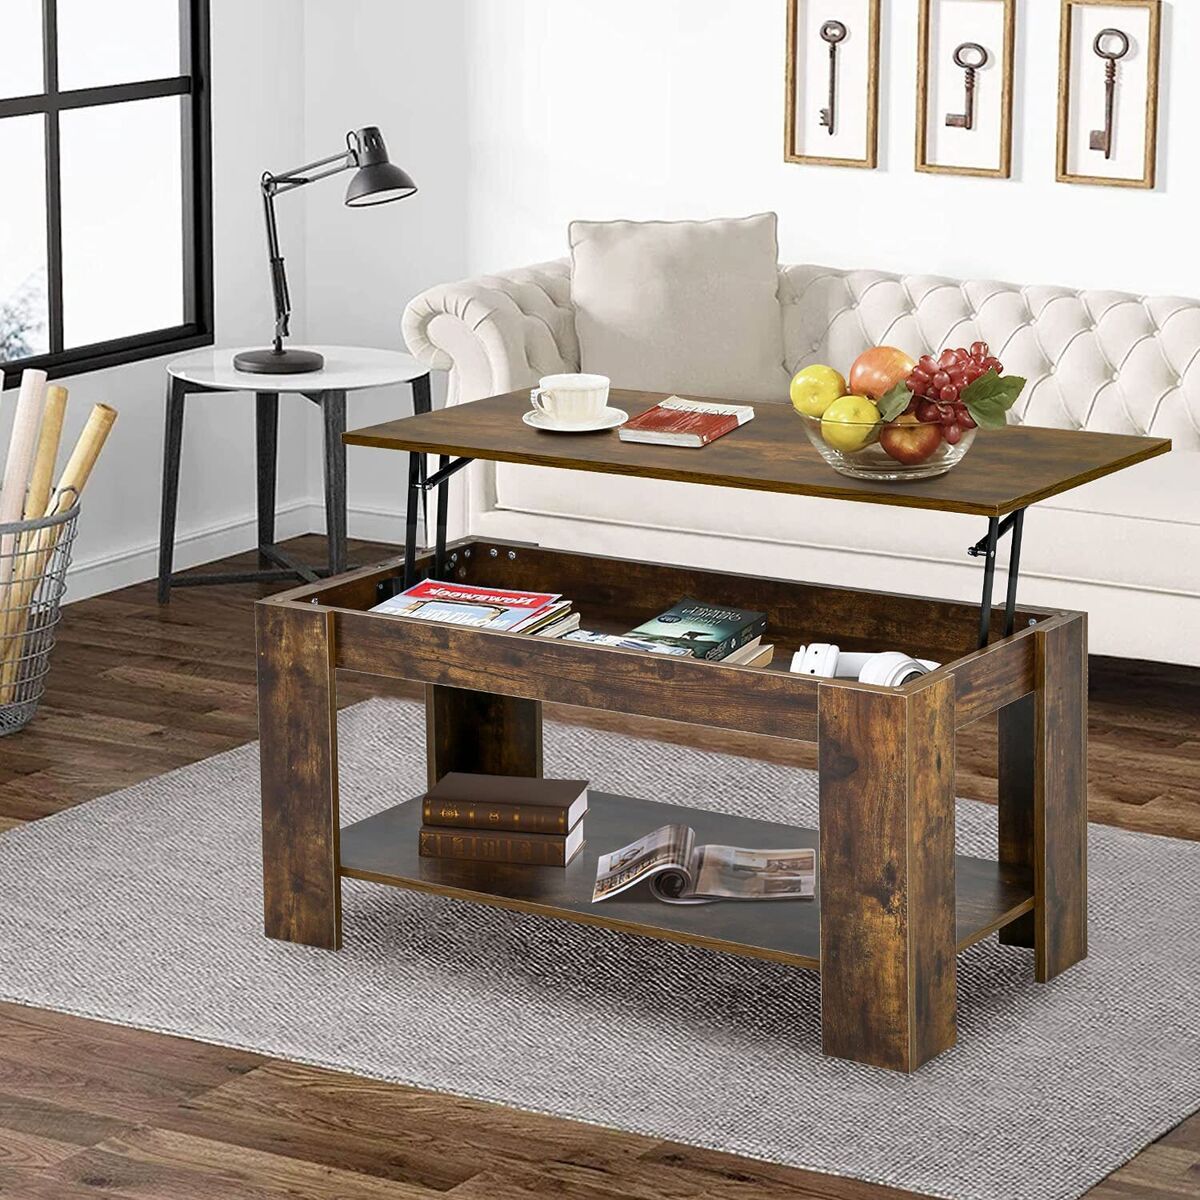 Lift Top Coffee Table With Hidden Compartment And Storage Shelf For Living  Room | Ebay Pertaining To Lift Top Coffee Tables With Shelves (View 13 of 15)